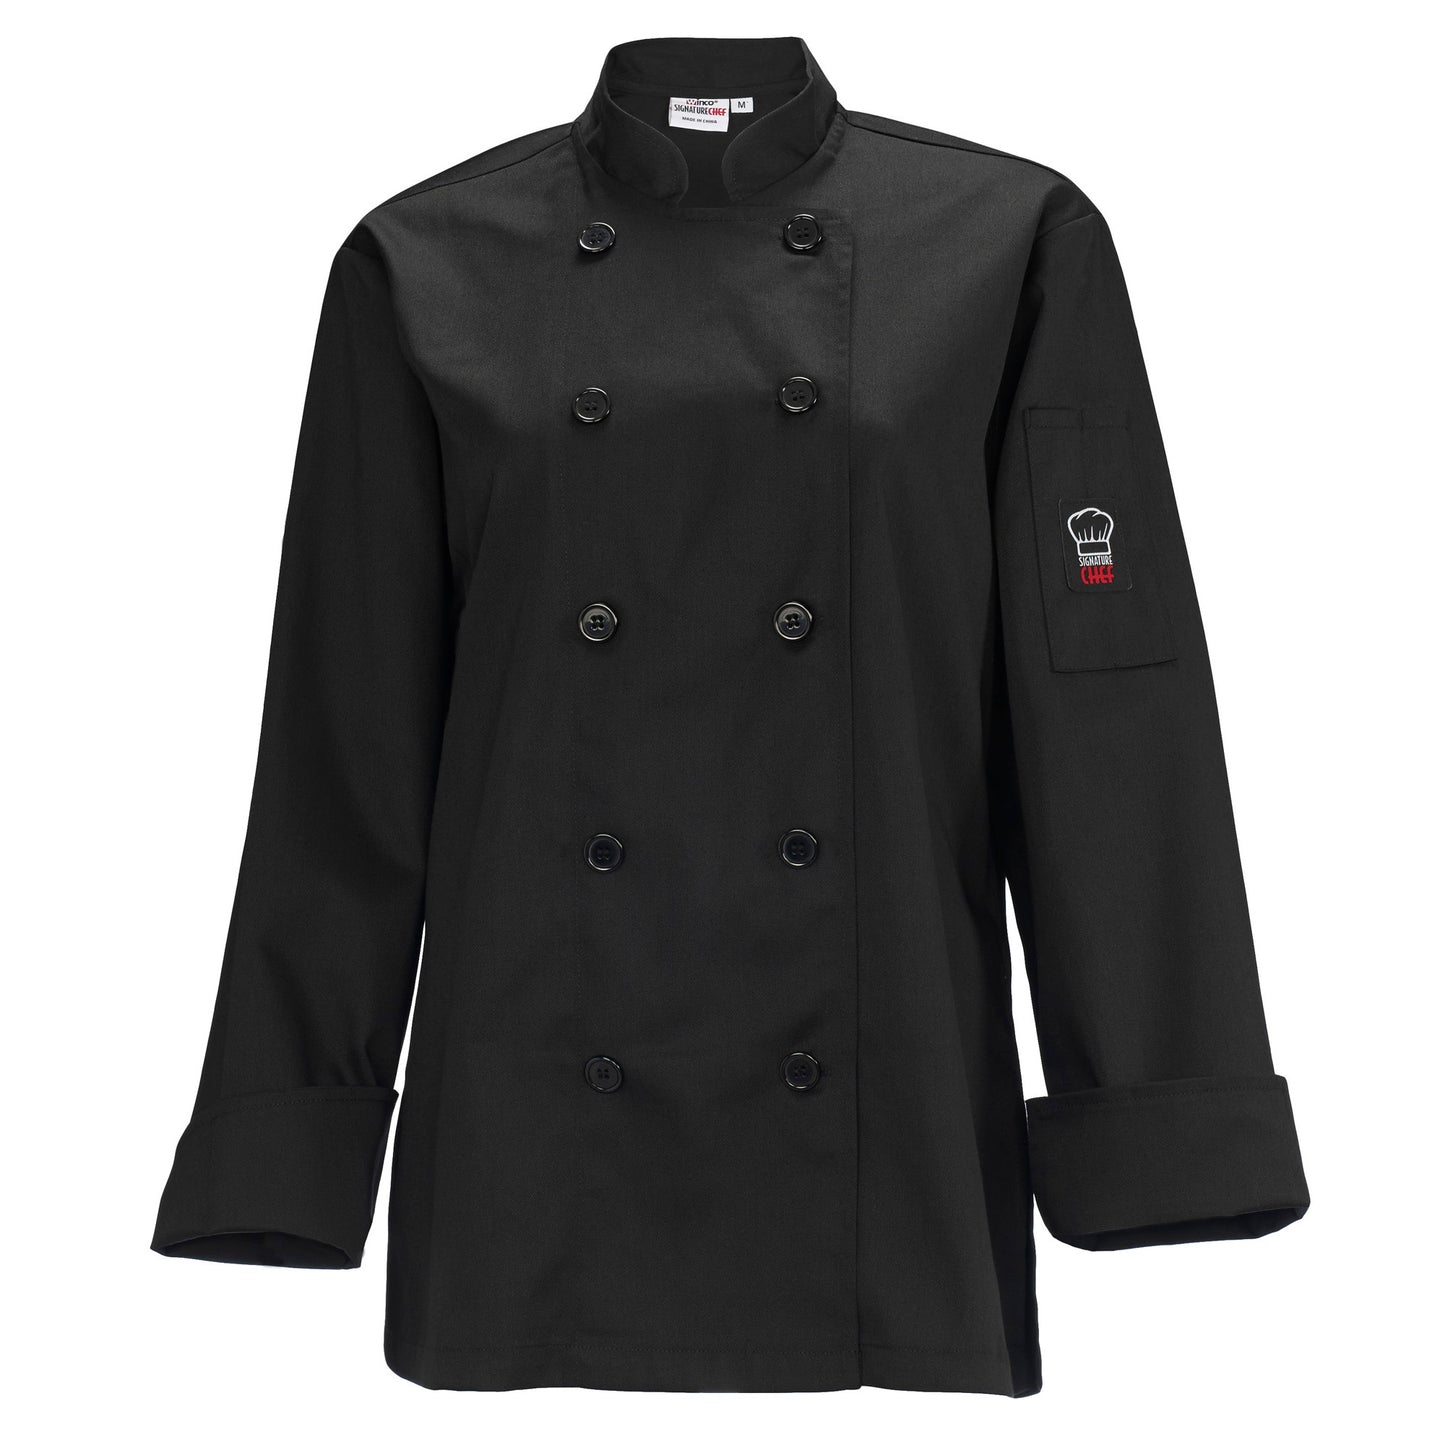 UNF-7KS - Women's Tapered Fit Chef Jacket